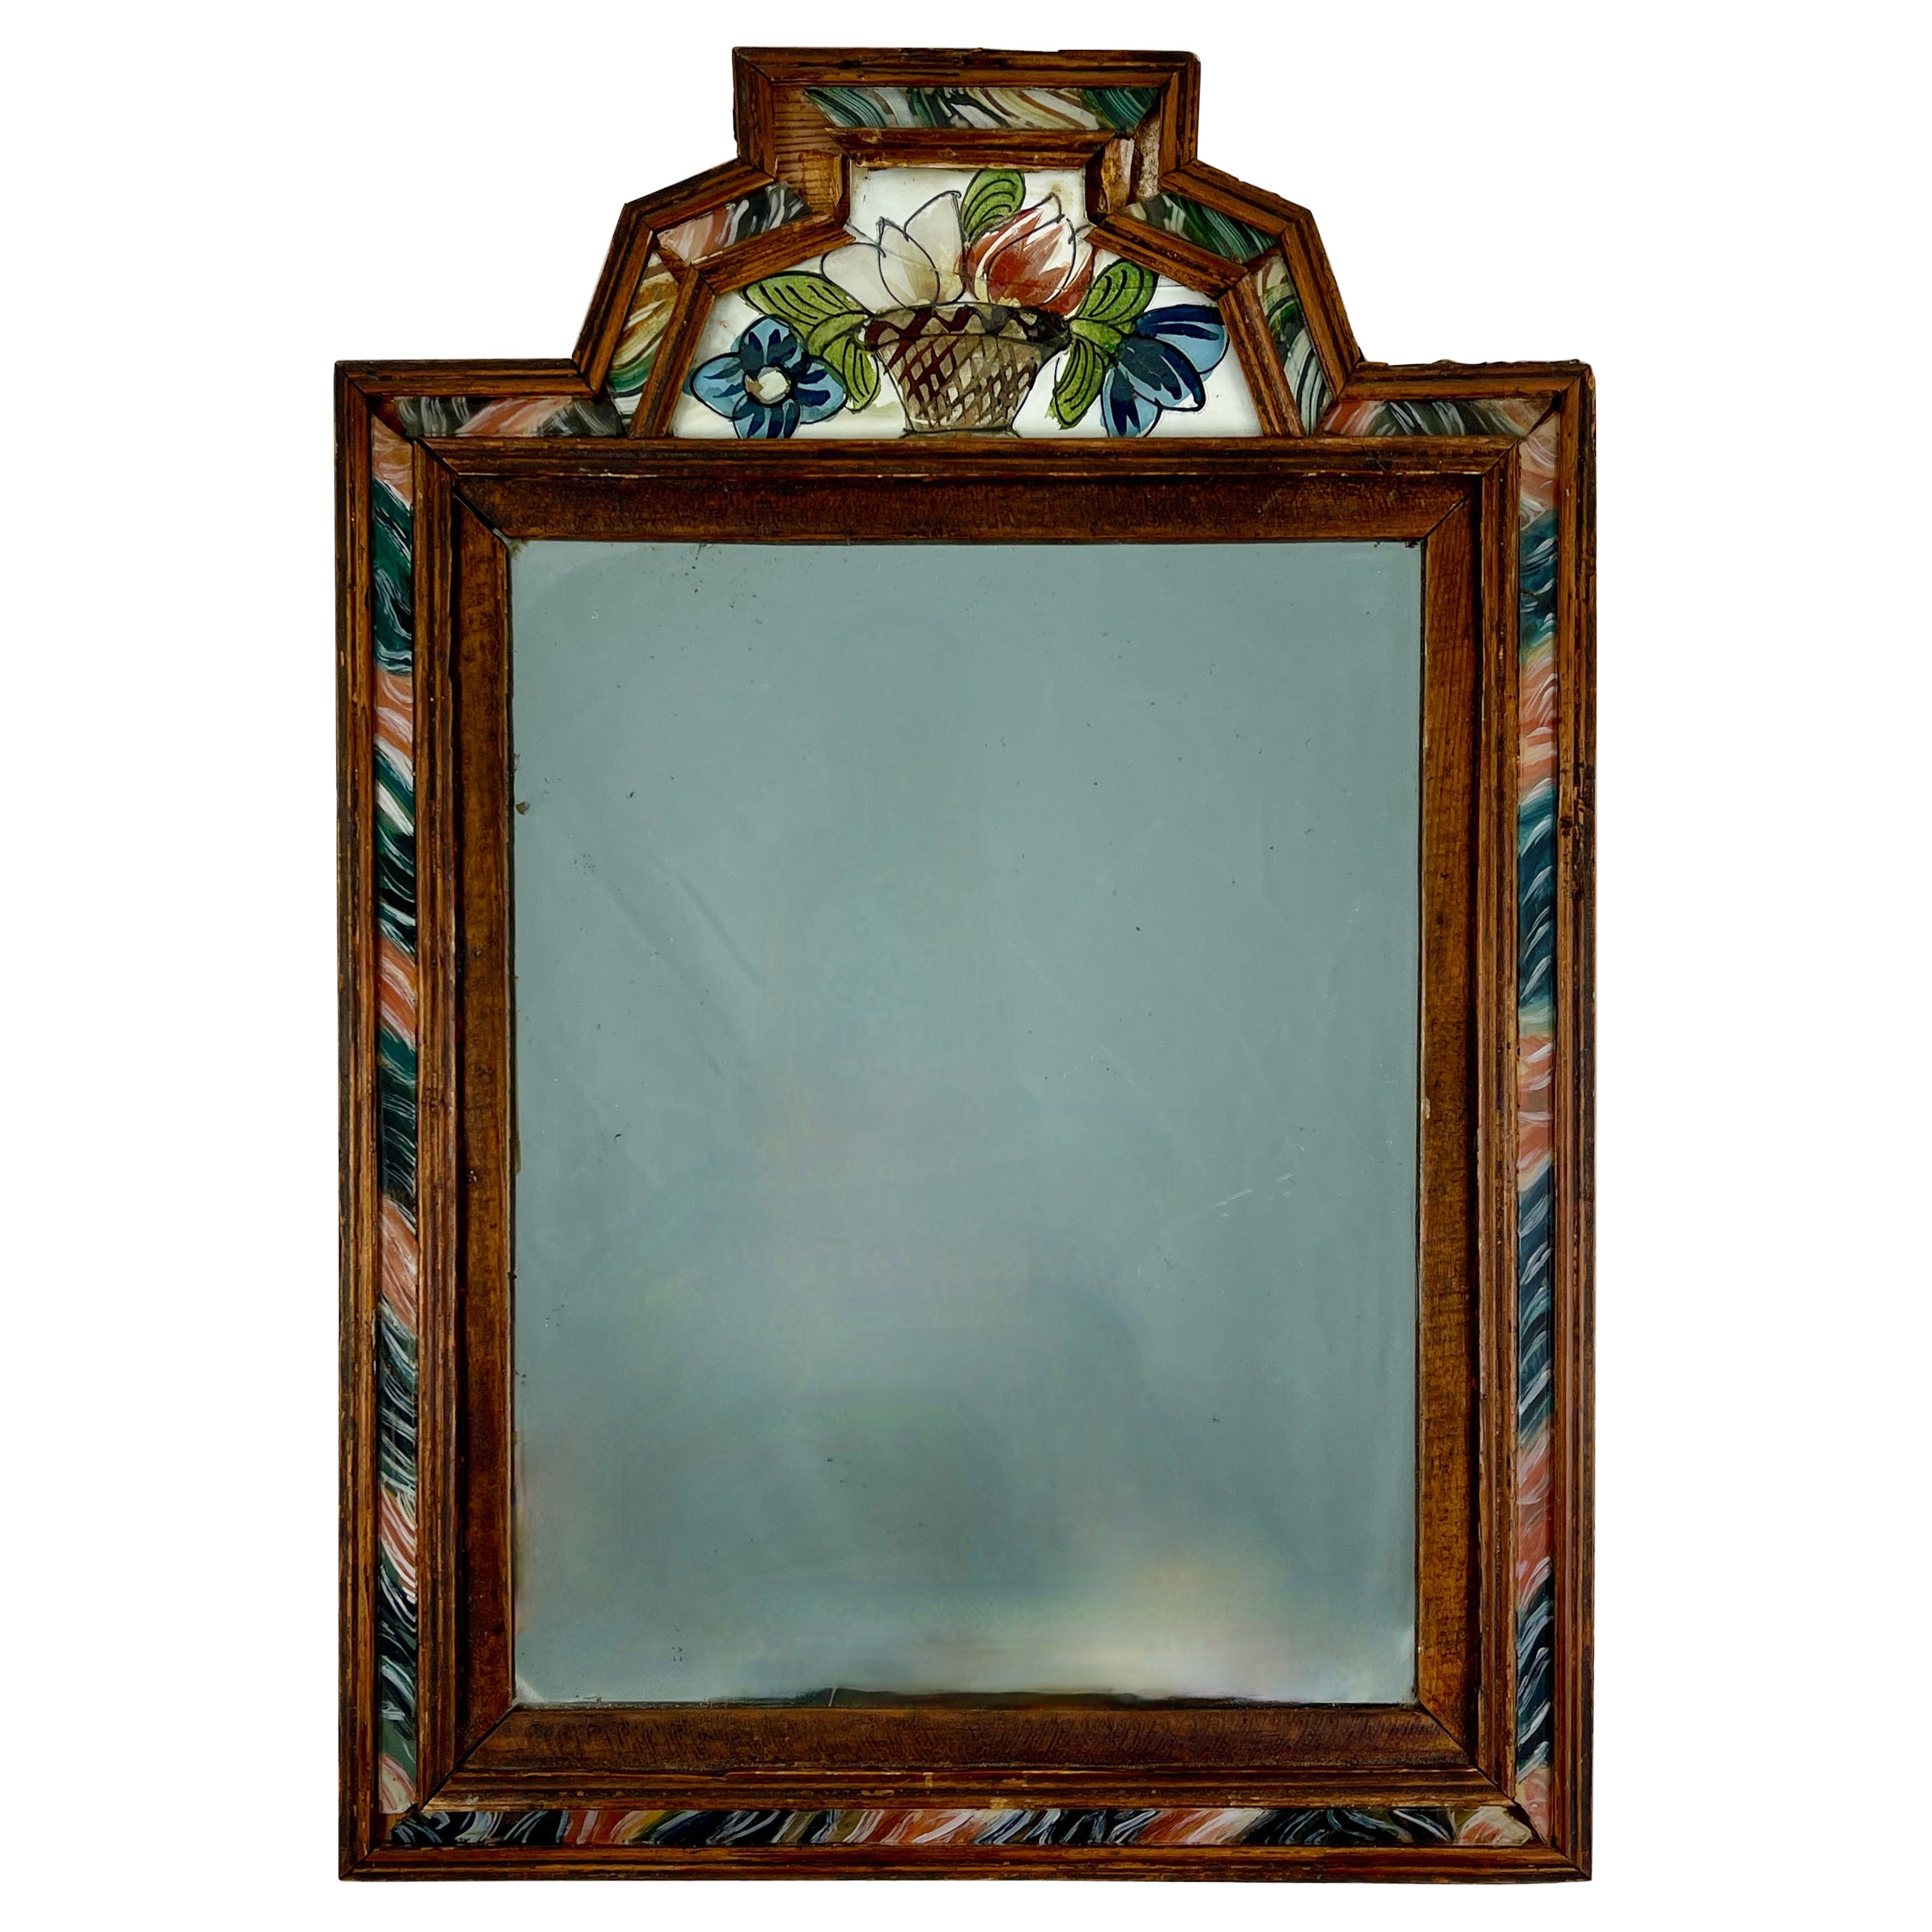 Reverse Painted Marbleized Glass & Wood Floral Basket Crest Courting Mirror